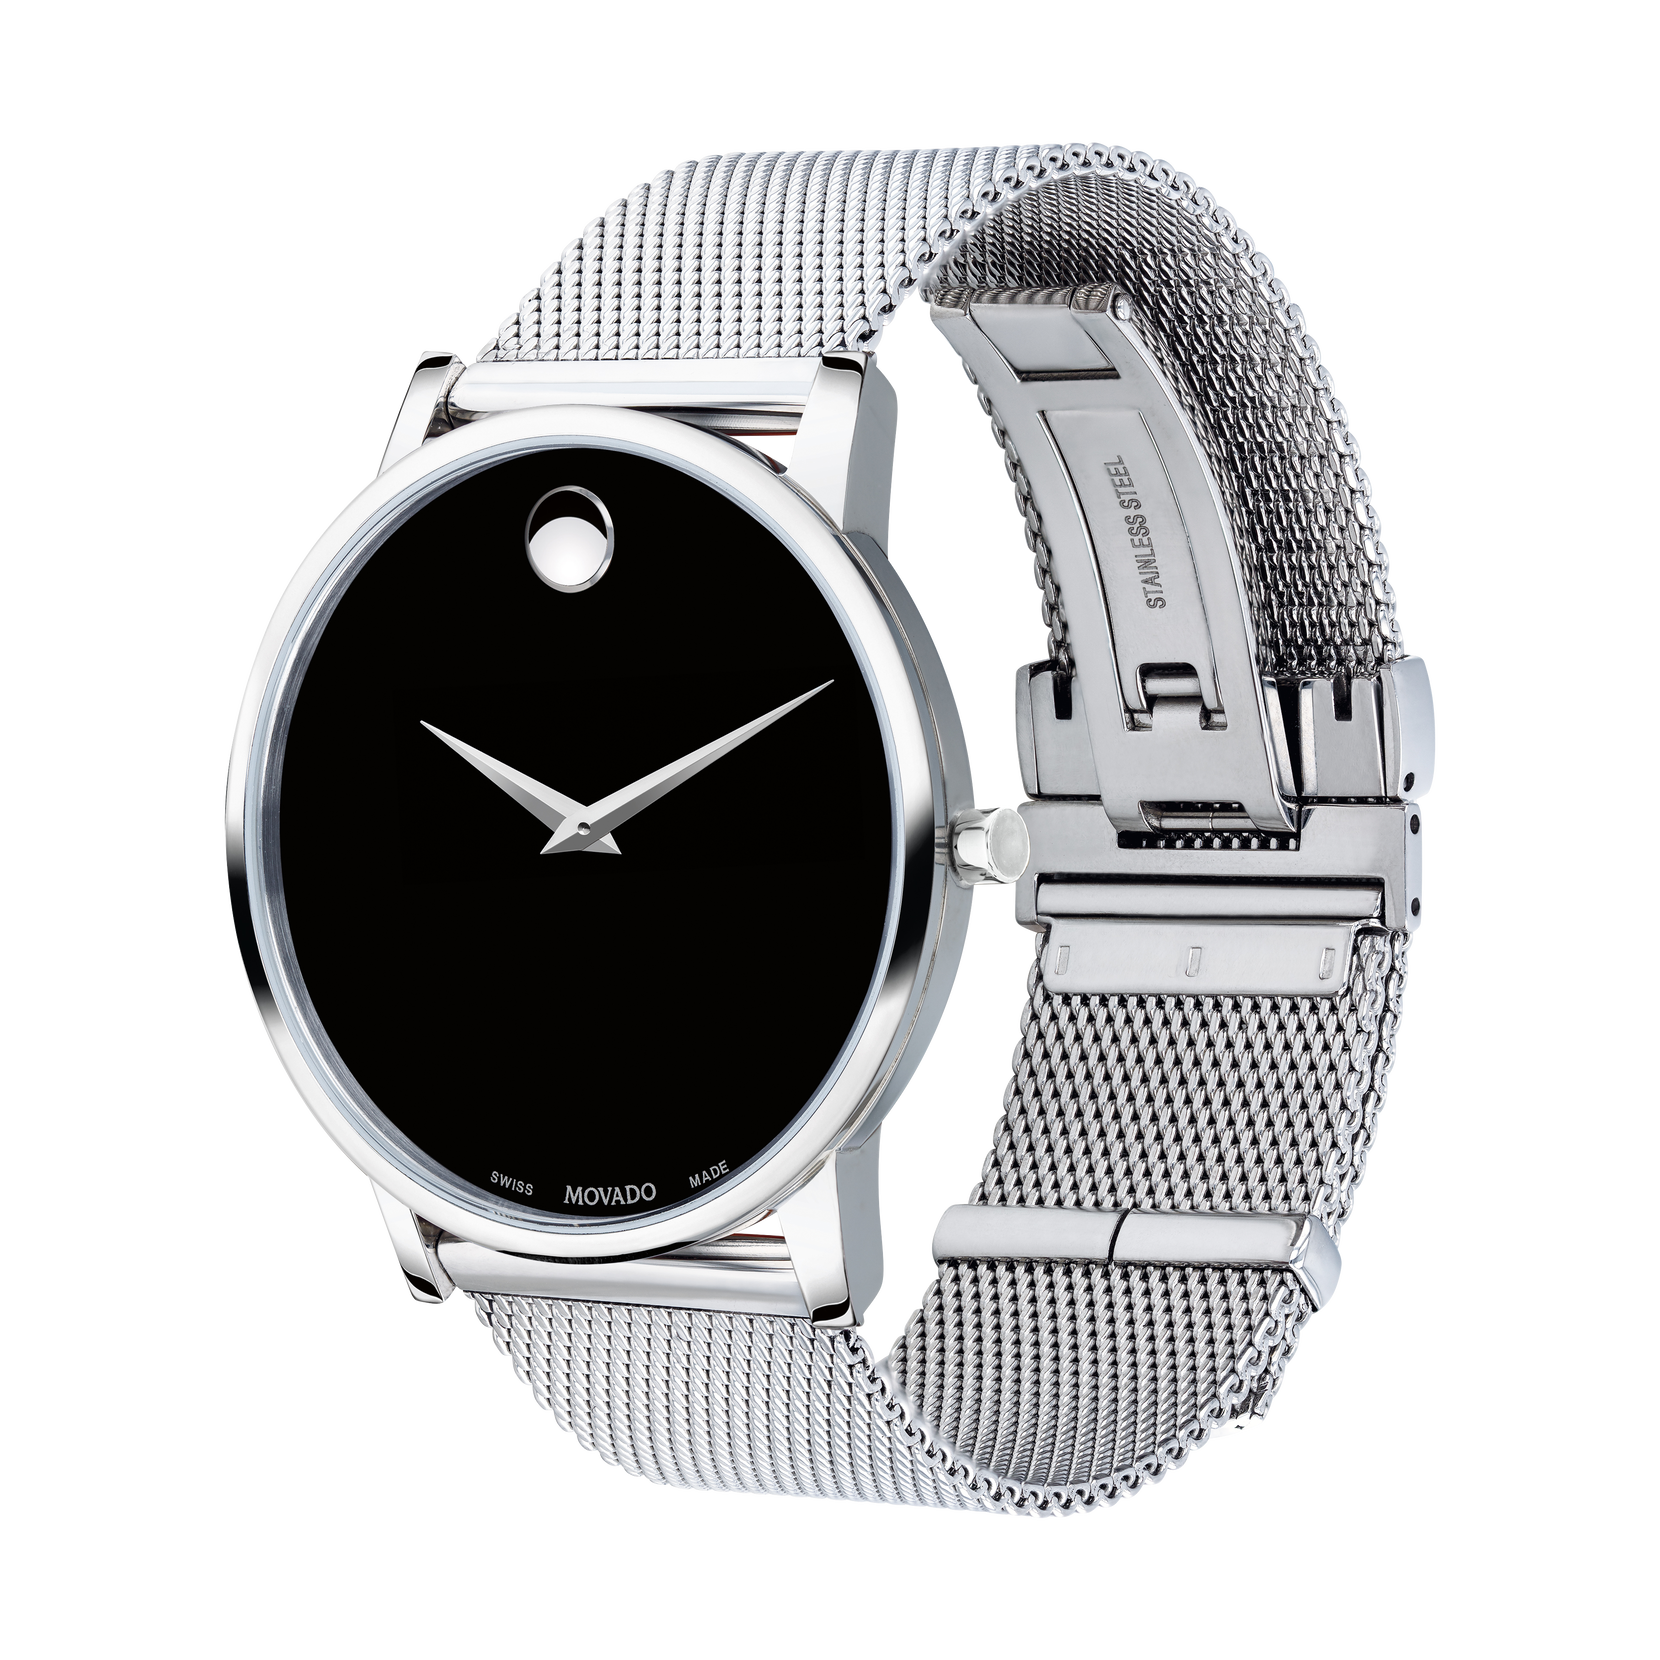 With Dial Stainless Movado Steel Mesh | Men\'s Museum Watch Bracelet Classic Black